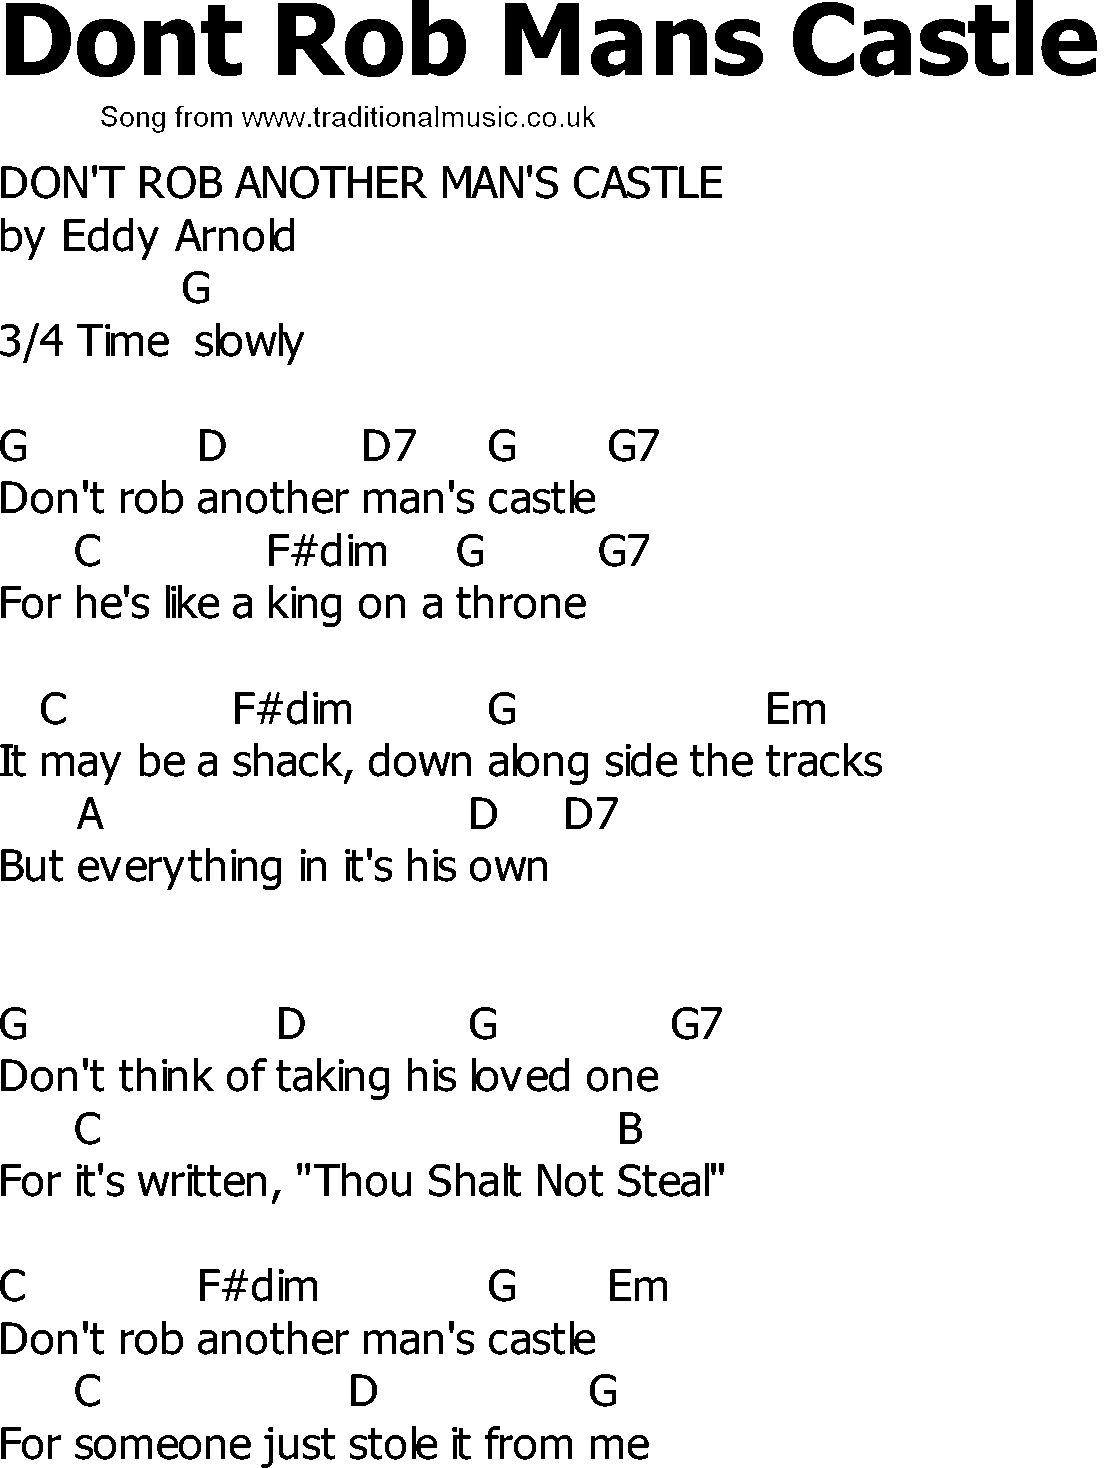 Old Country song lyrics with chords - Dont Rob Mans Castle